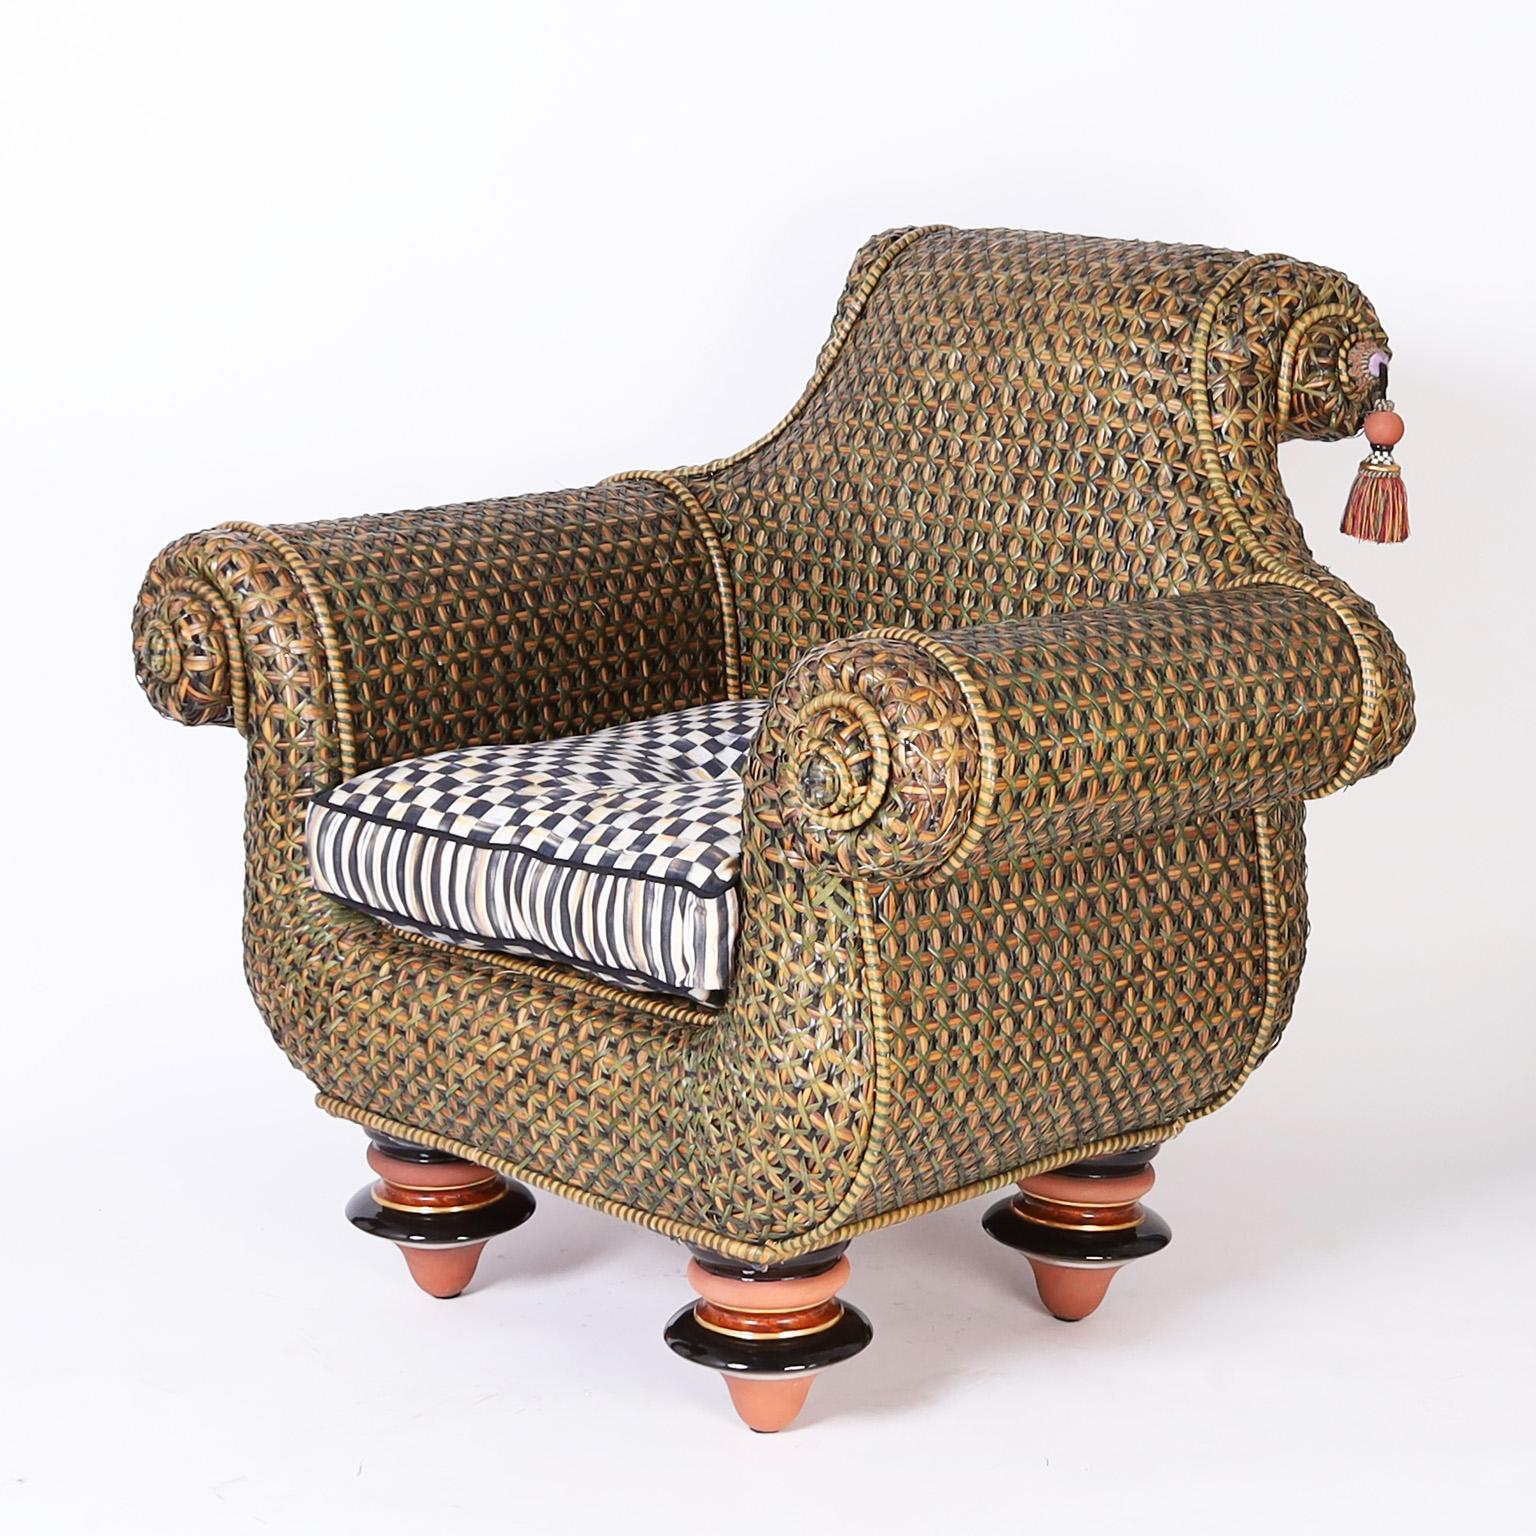 Armchair and ottoman with an eccentric mix of materials and ideas crafted in wicker or reed in a bold exaggerated, yet comfortable form, featuring an ambitious multi color weave pattern highlighted with piping, tassels, with ceramic bulbs and terra